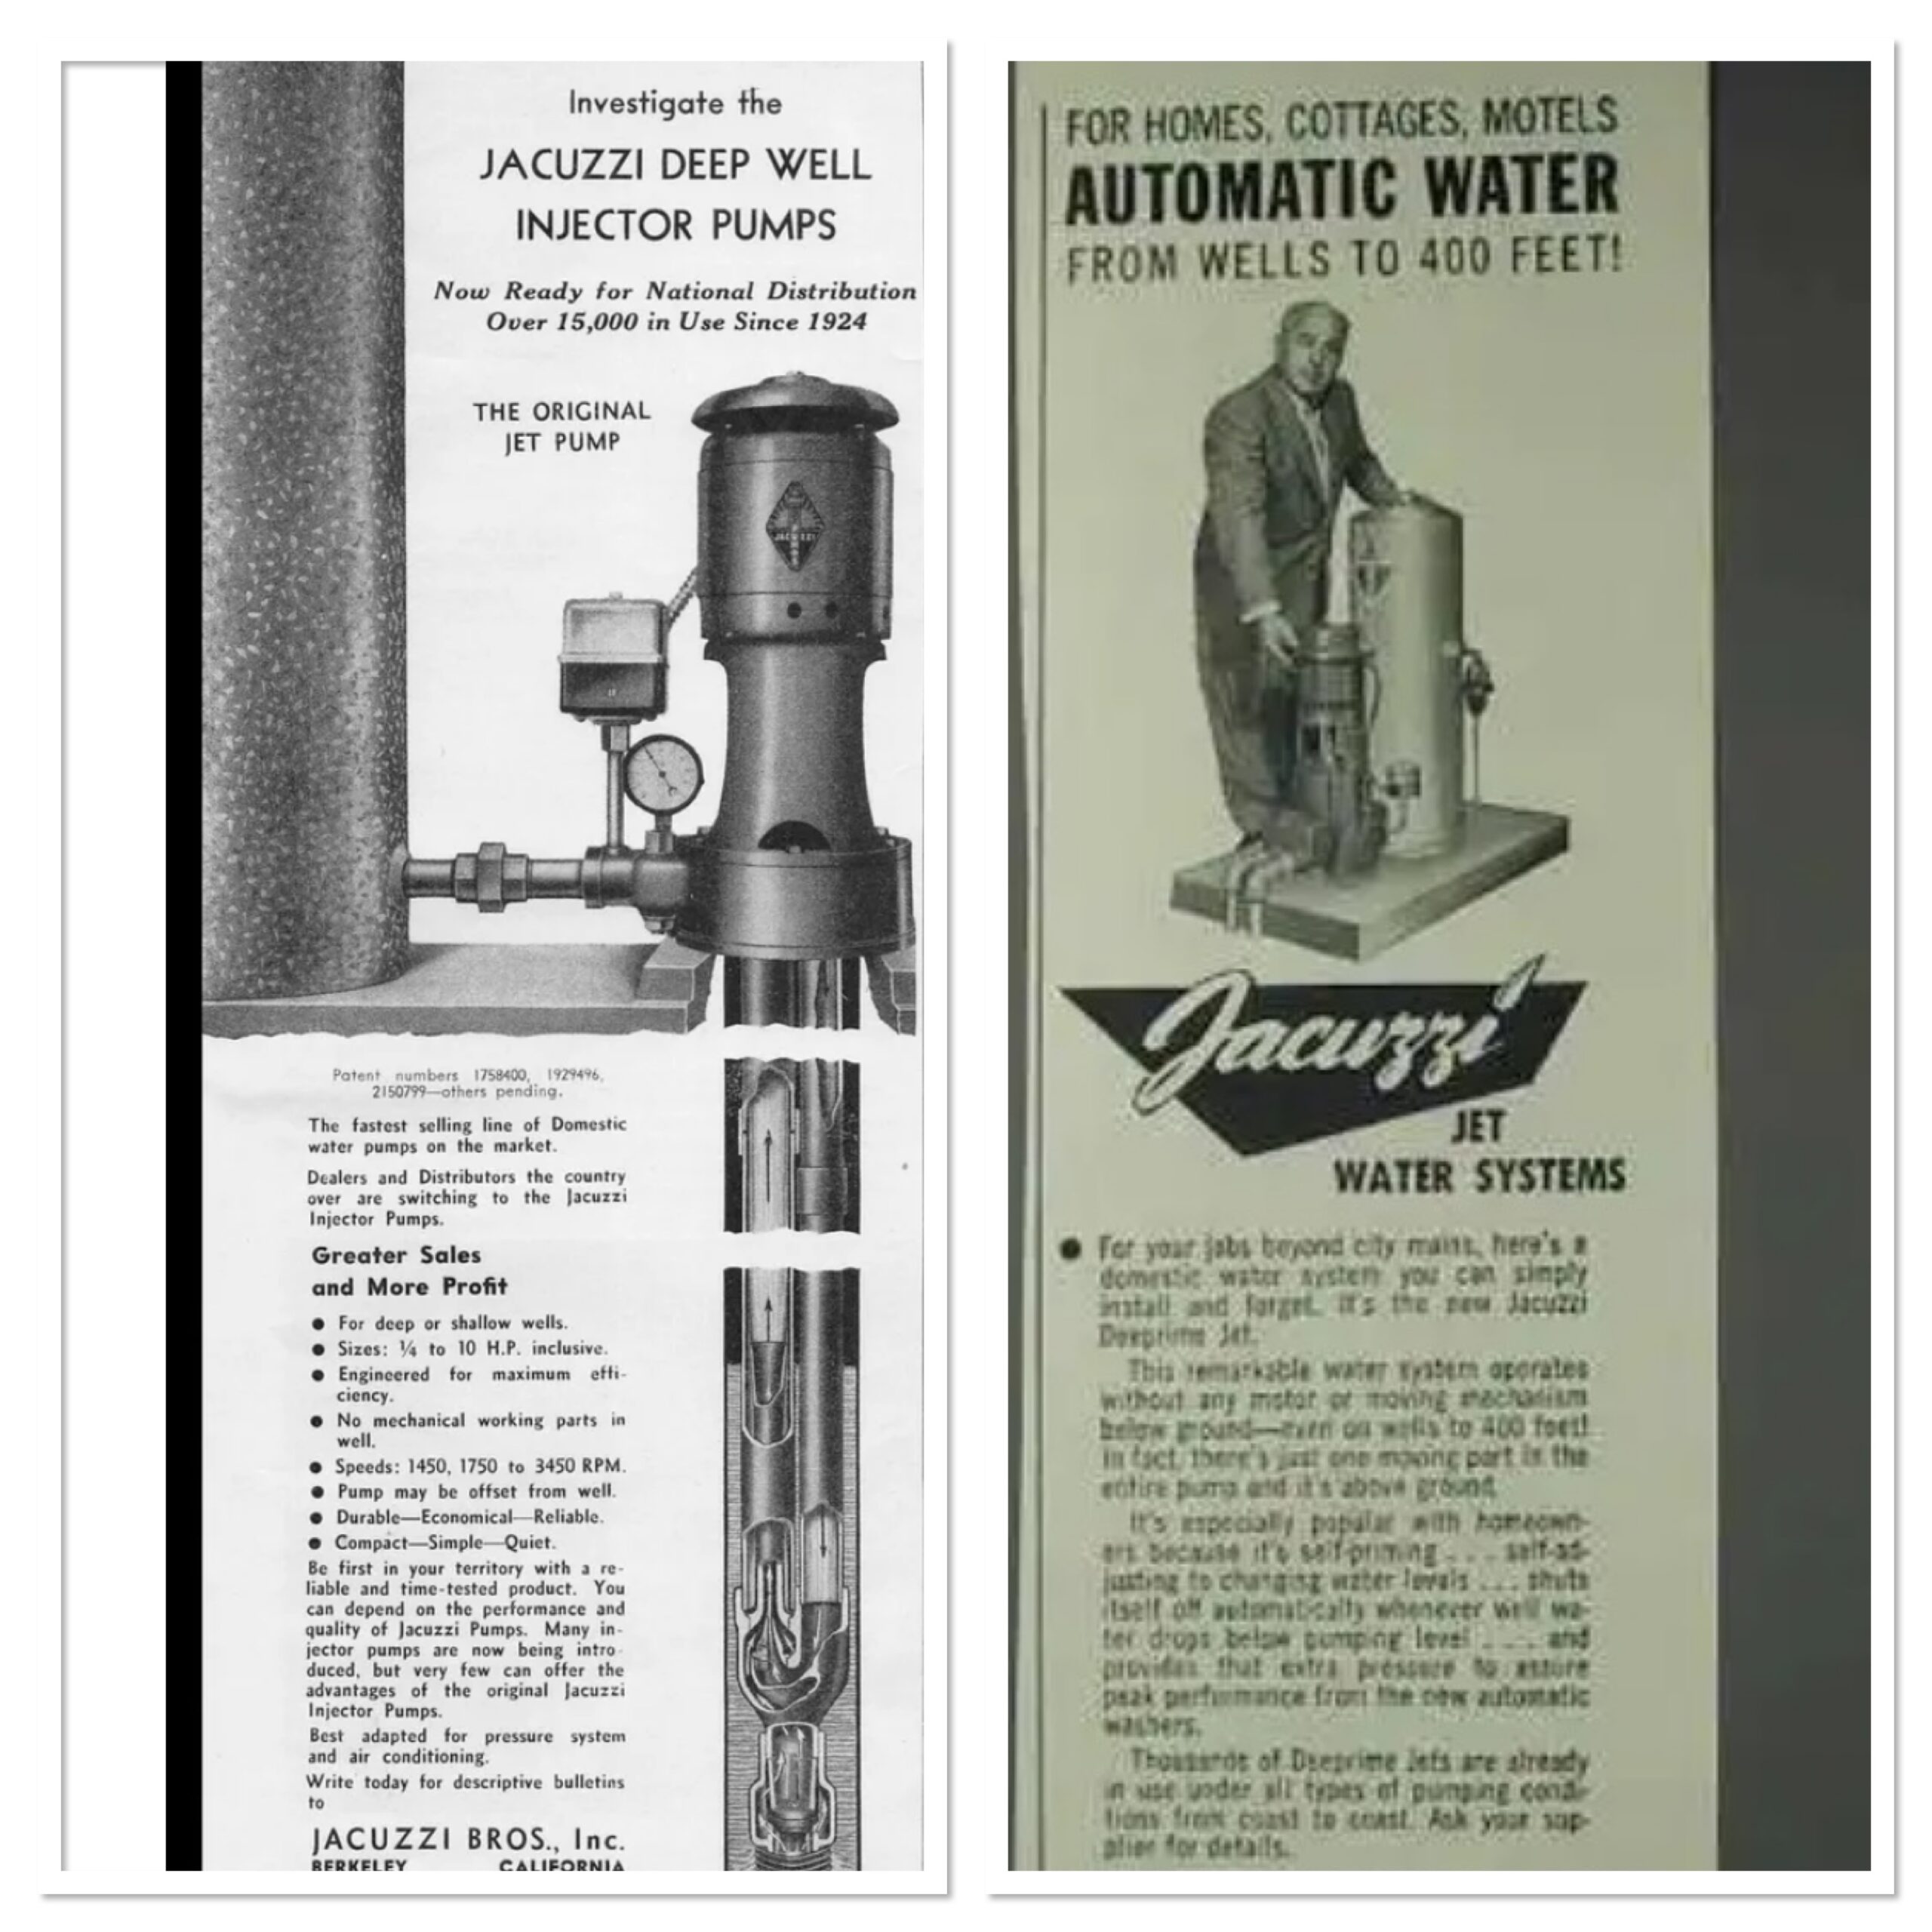 Two clippings show a 1939 advertisement for Jacuzzi Deep Well Injector Pumps and a 1958 advertisement for Jacuzzi Jet Water Systems.